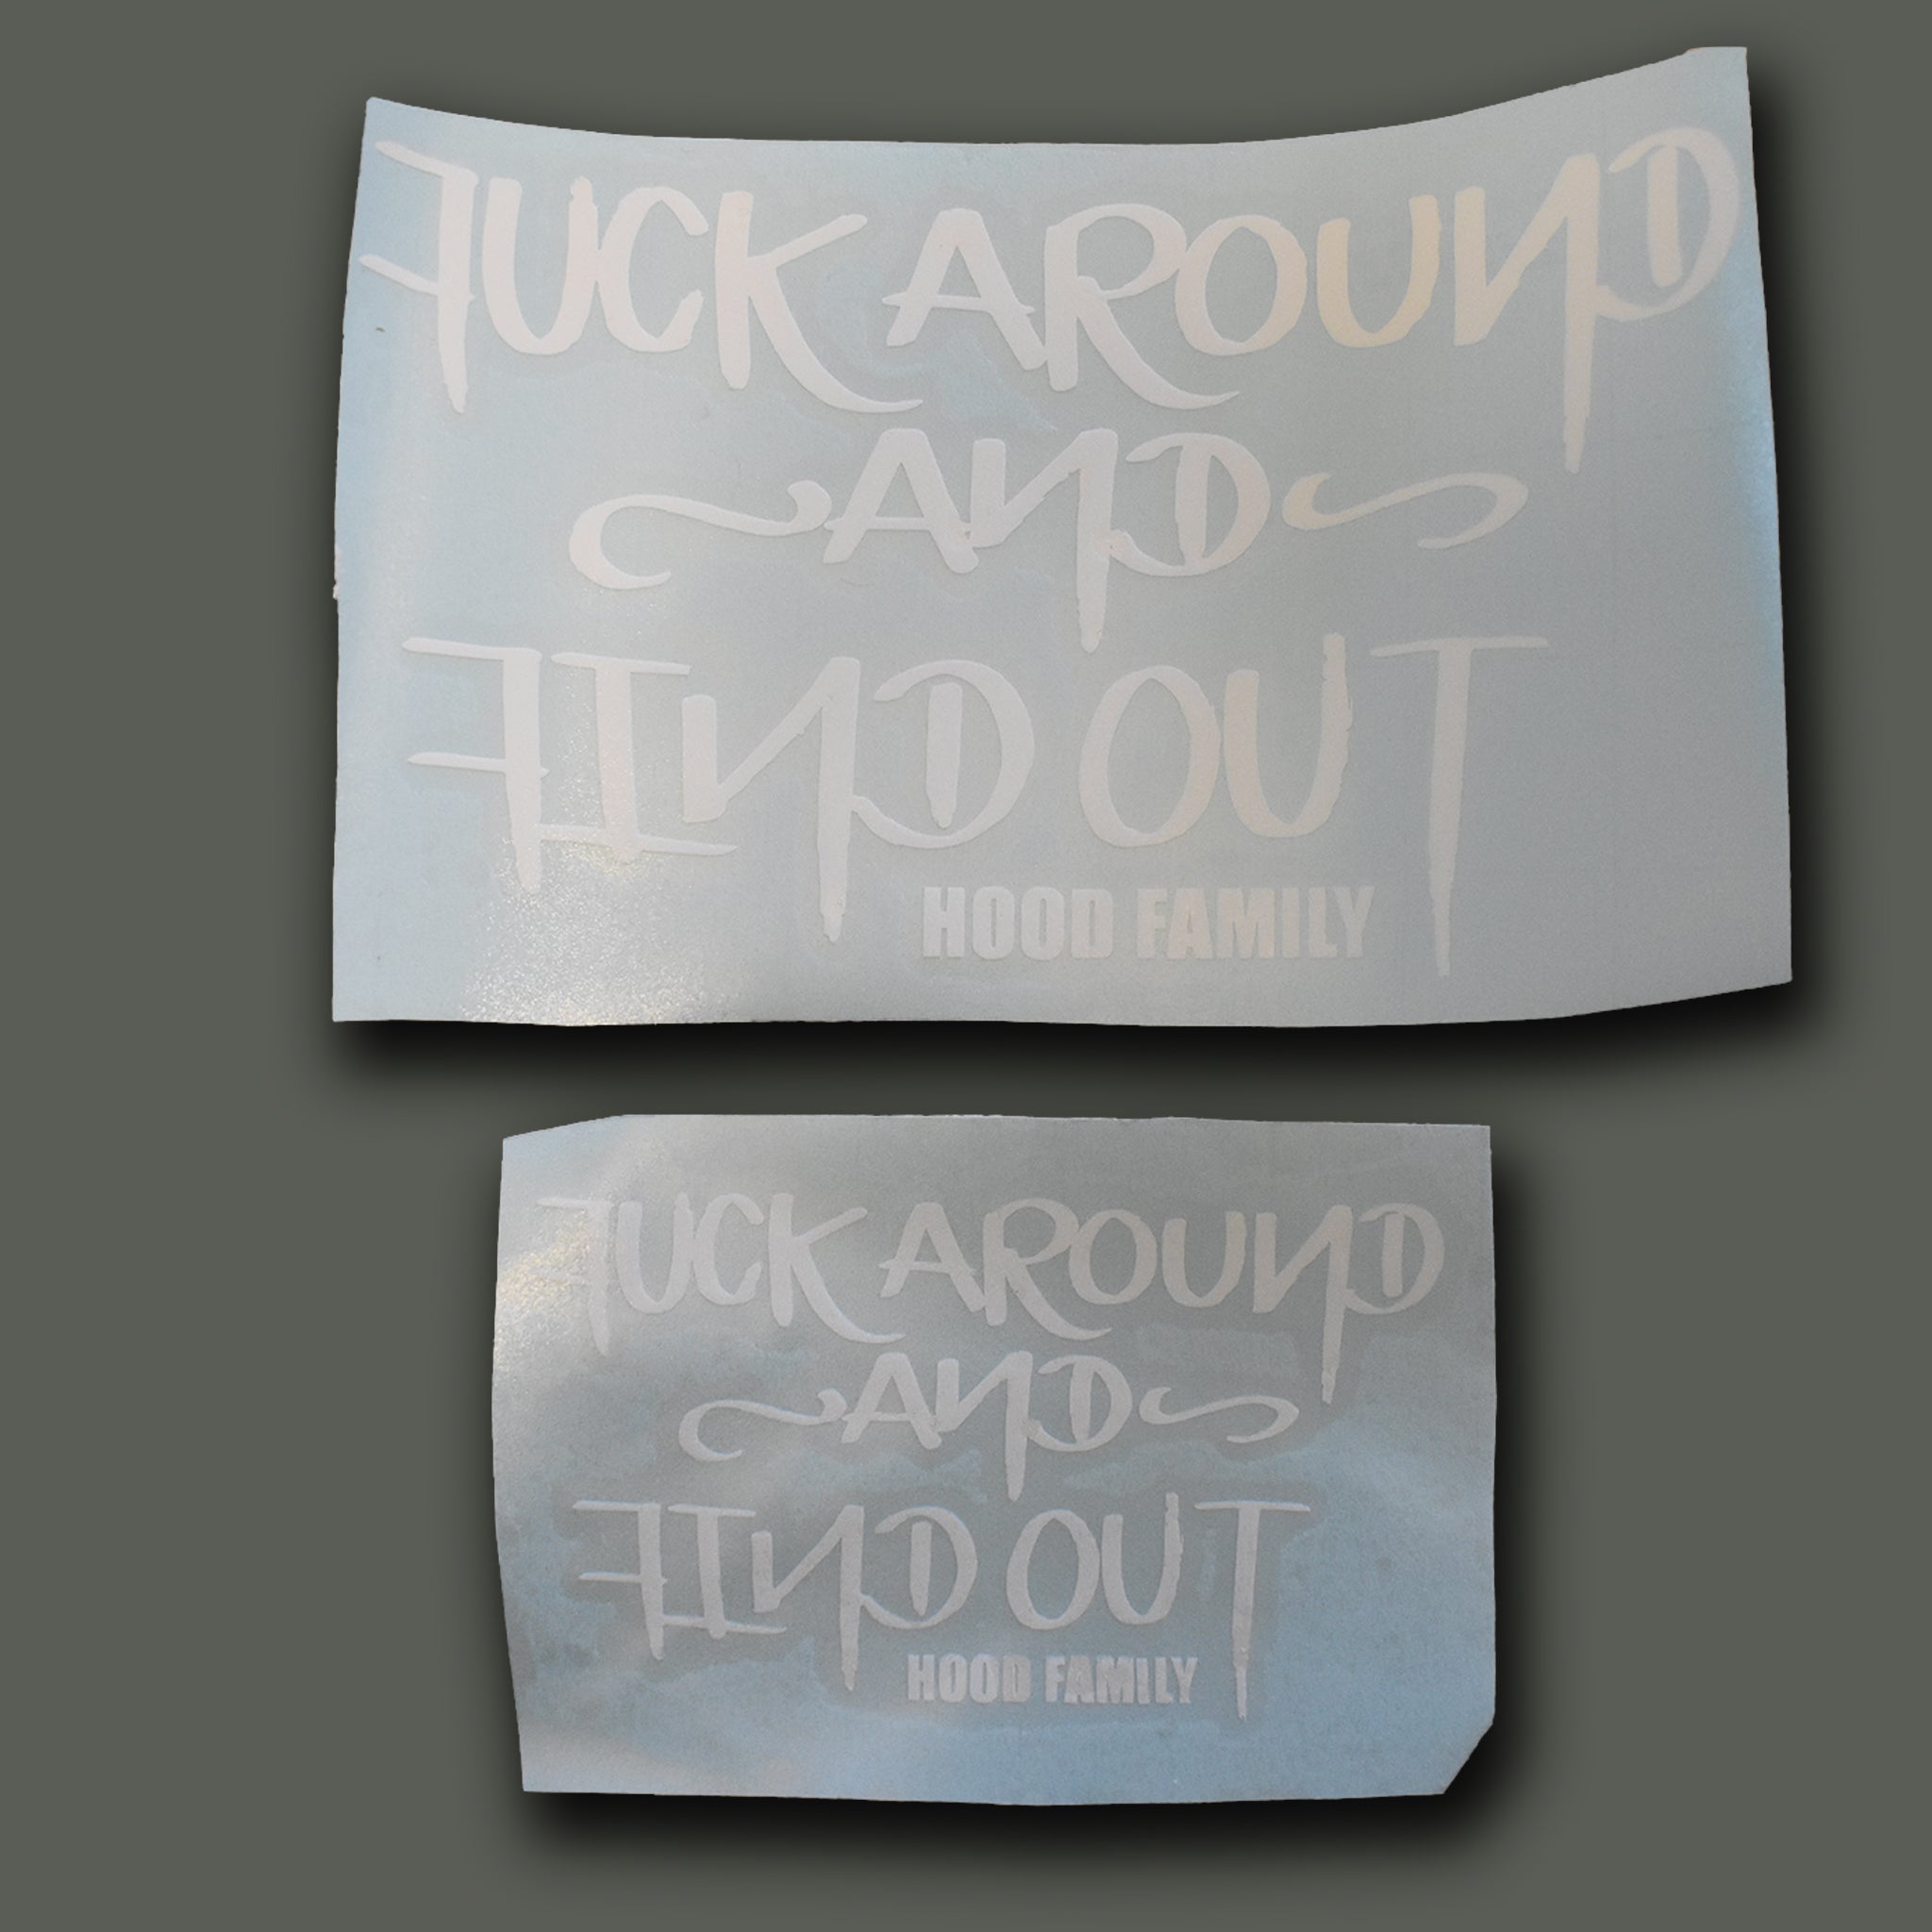 Fuck Around and Find Out Vinyl Bumper Sticker Political Sticker FREE  SHIPPING 